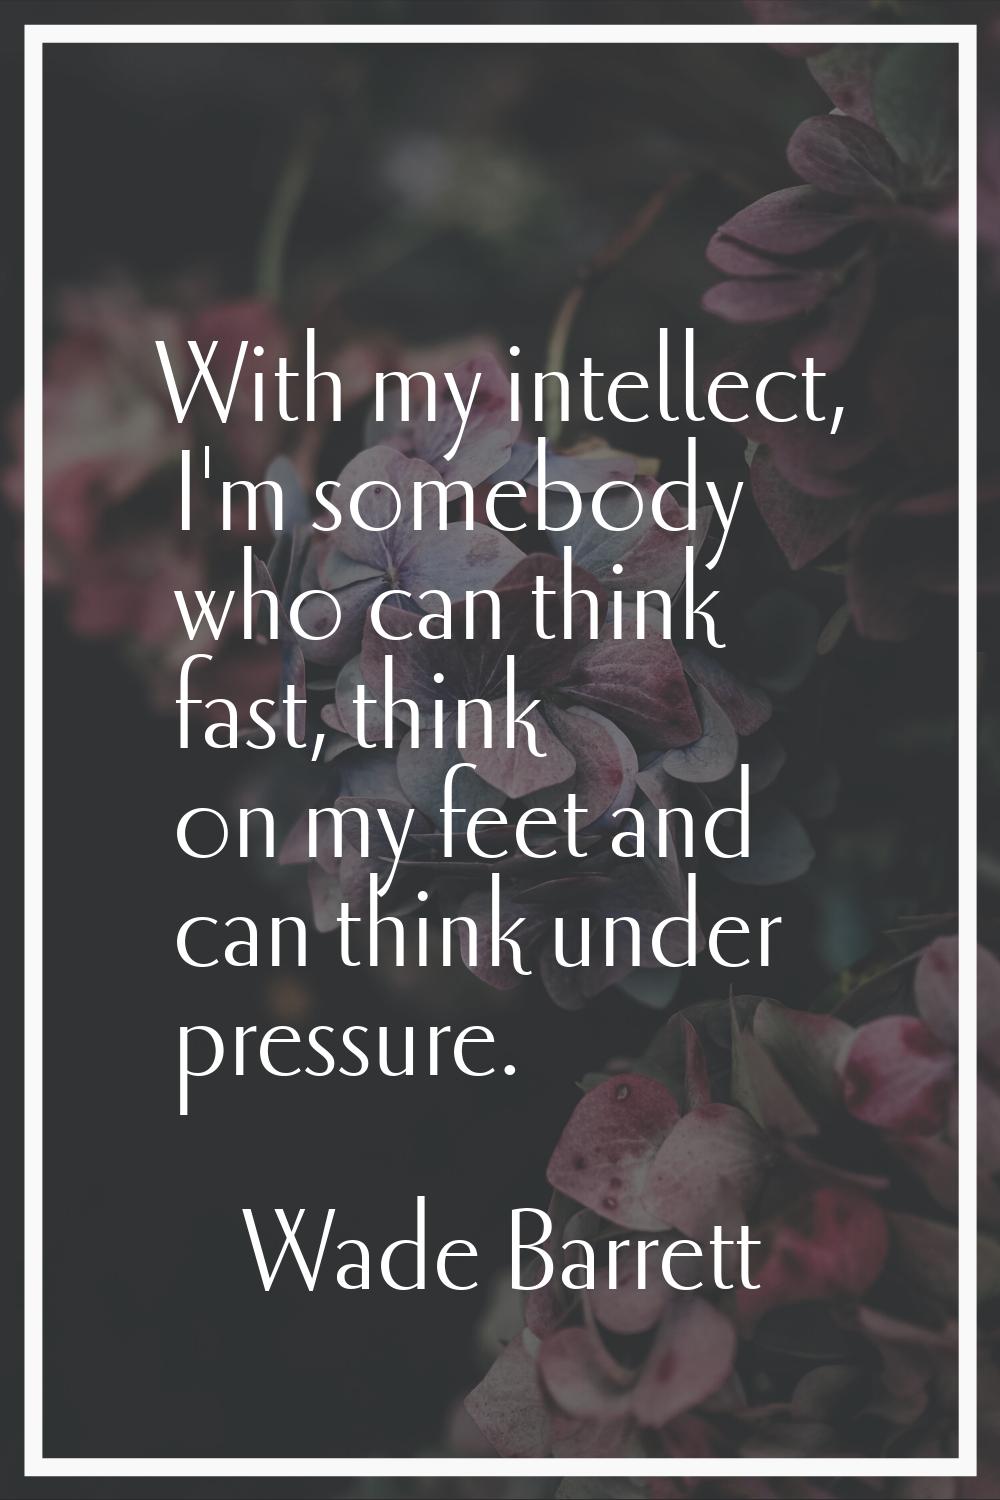 With my intellect, I'm somebody who can think fast, think on my feet and can think under pressure.